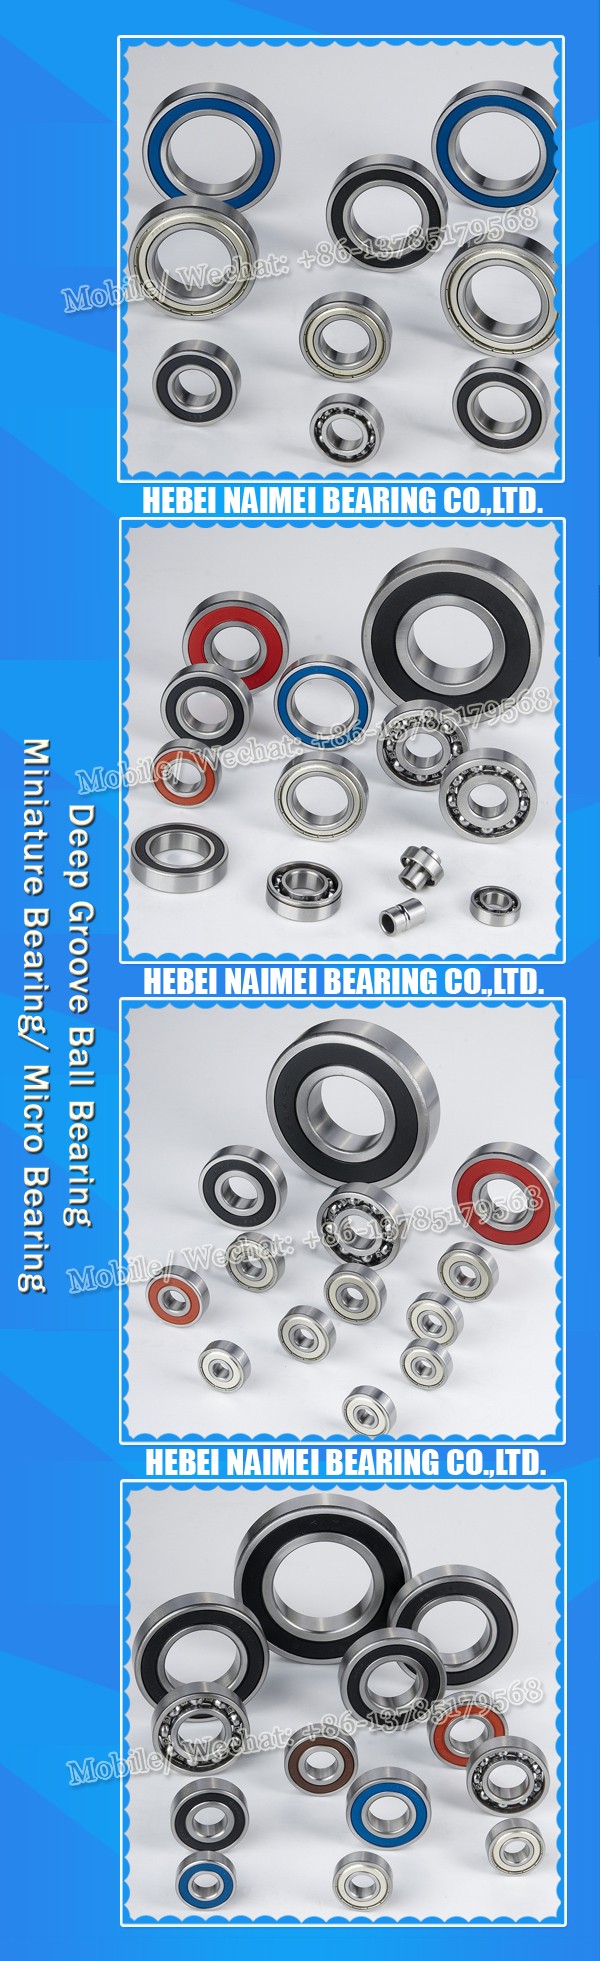 Small and mini size ball bearing 602 603 604 605 606 607 608 609 ZZ 2RS